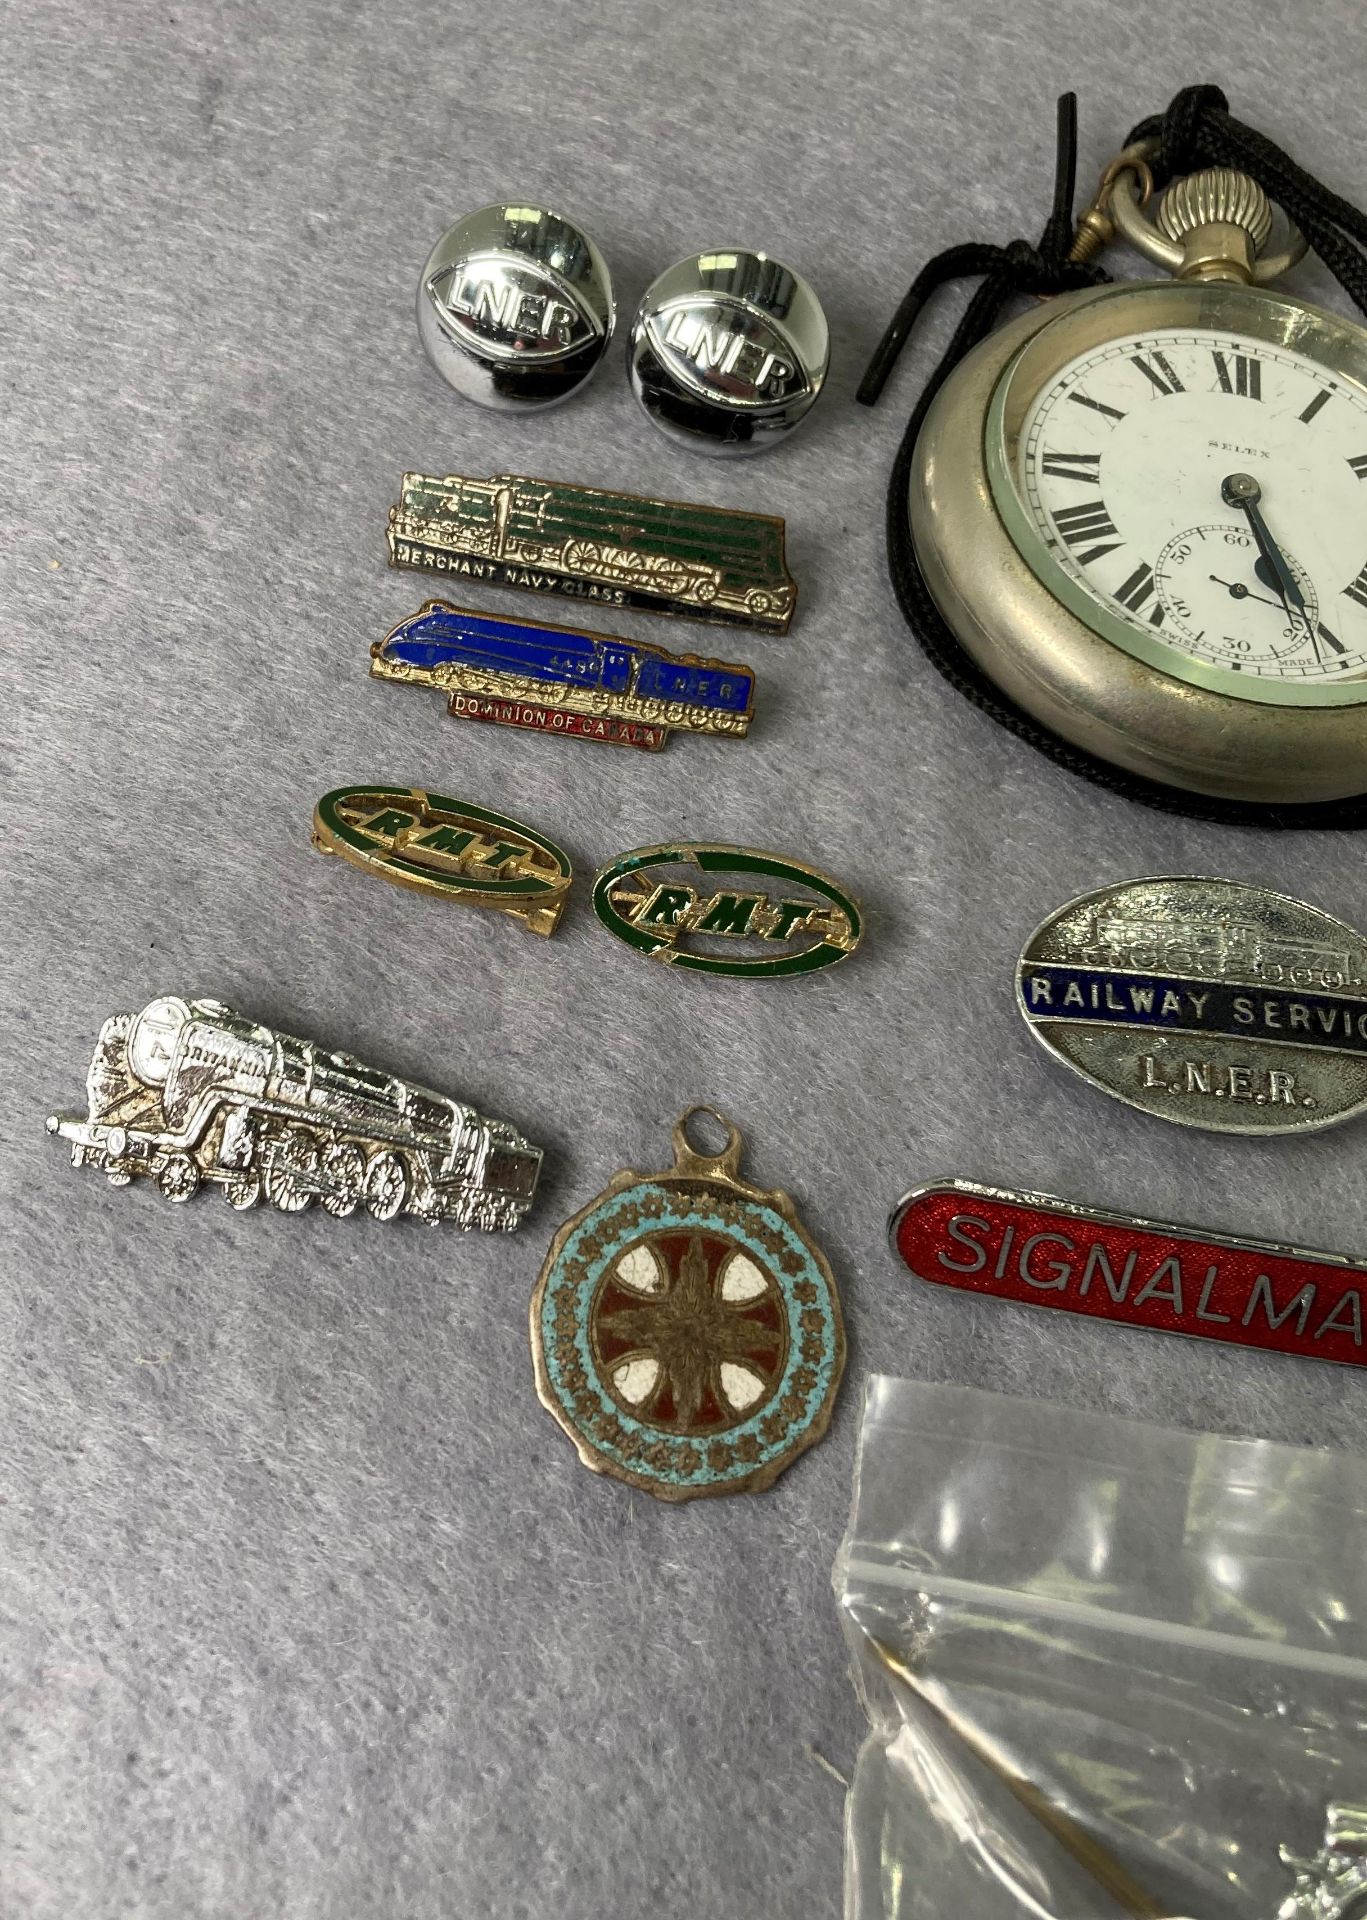 Selex pocket watch (working) with "LNER 9176 Relief" engraved to back, railway badges, cap badge, - Image 3 of 5